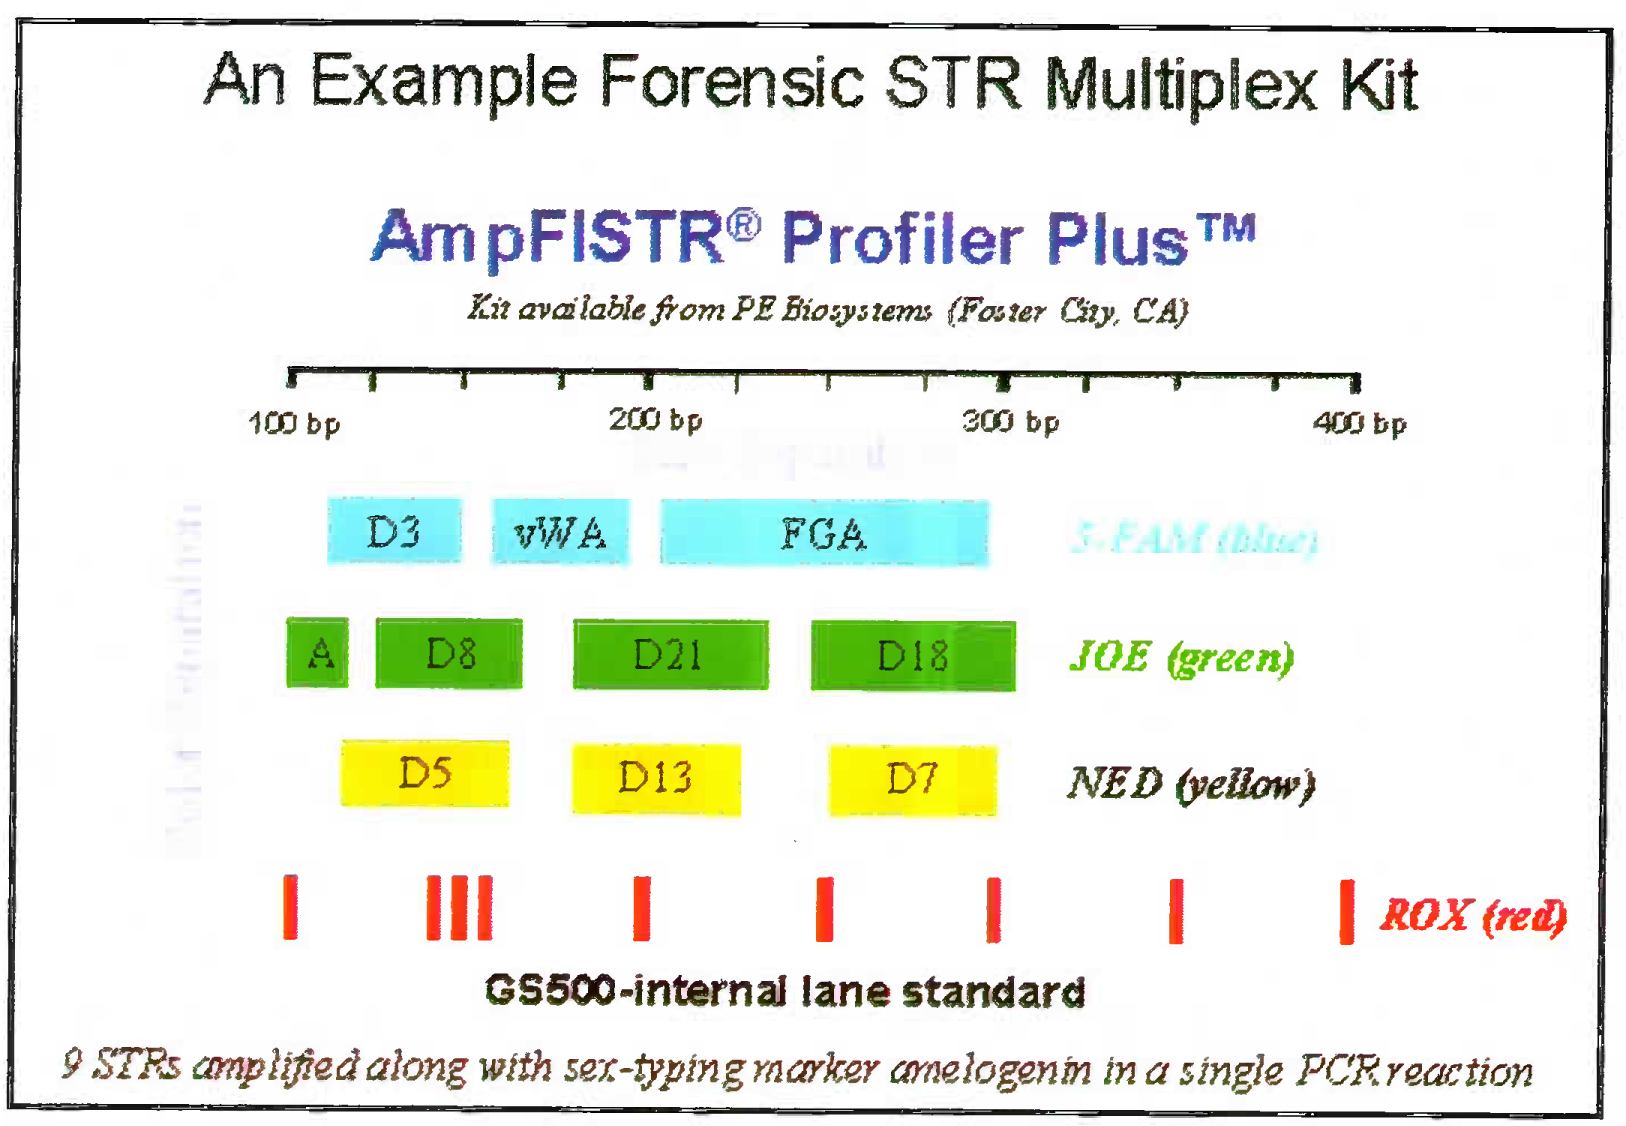 9 STRs amplified along with sex-typing marker amelogenim in a single PCR reaction